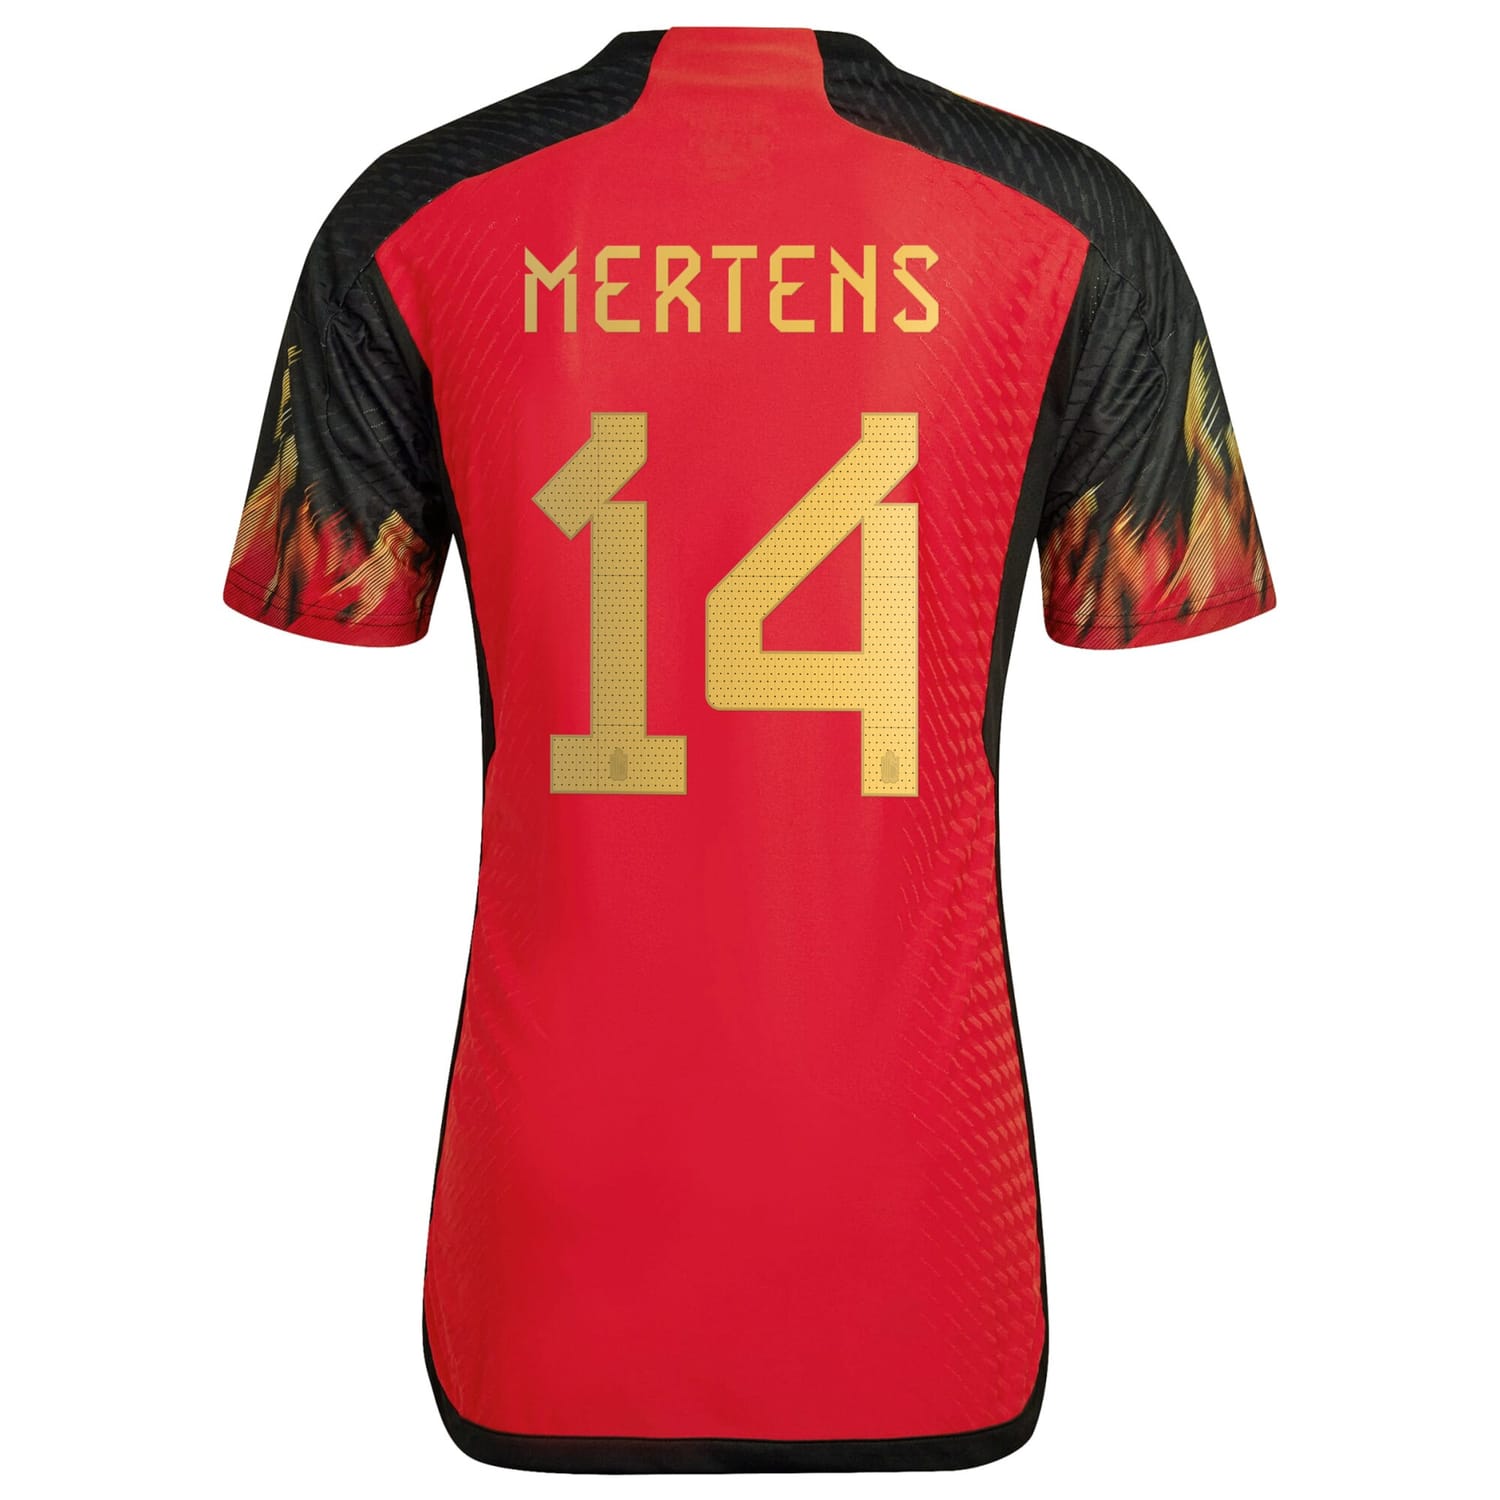 Belgium National Team Home Authentic Jersey Shirt 2022 player Dries Mertens 14 printing for Men